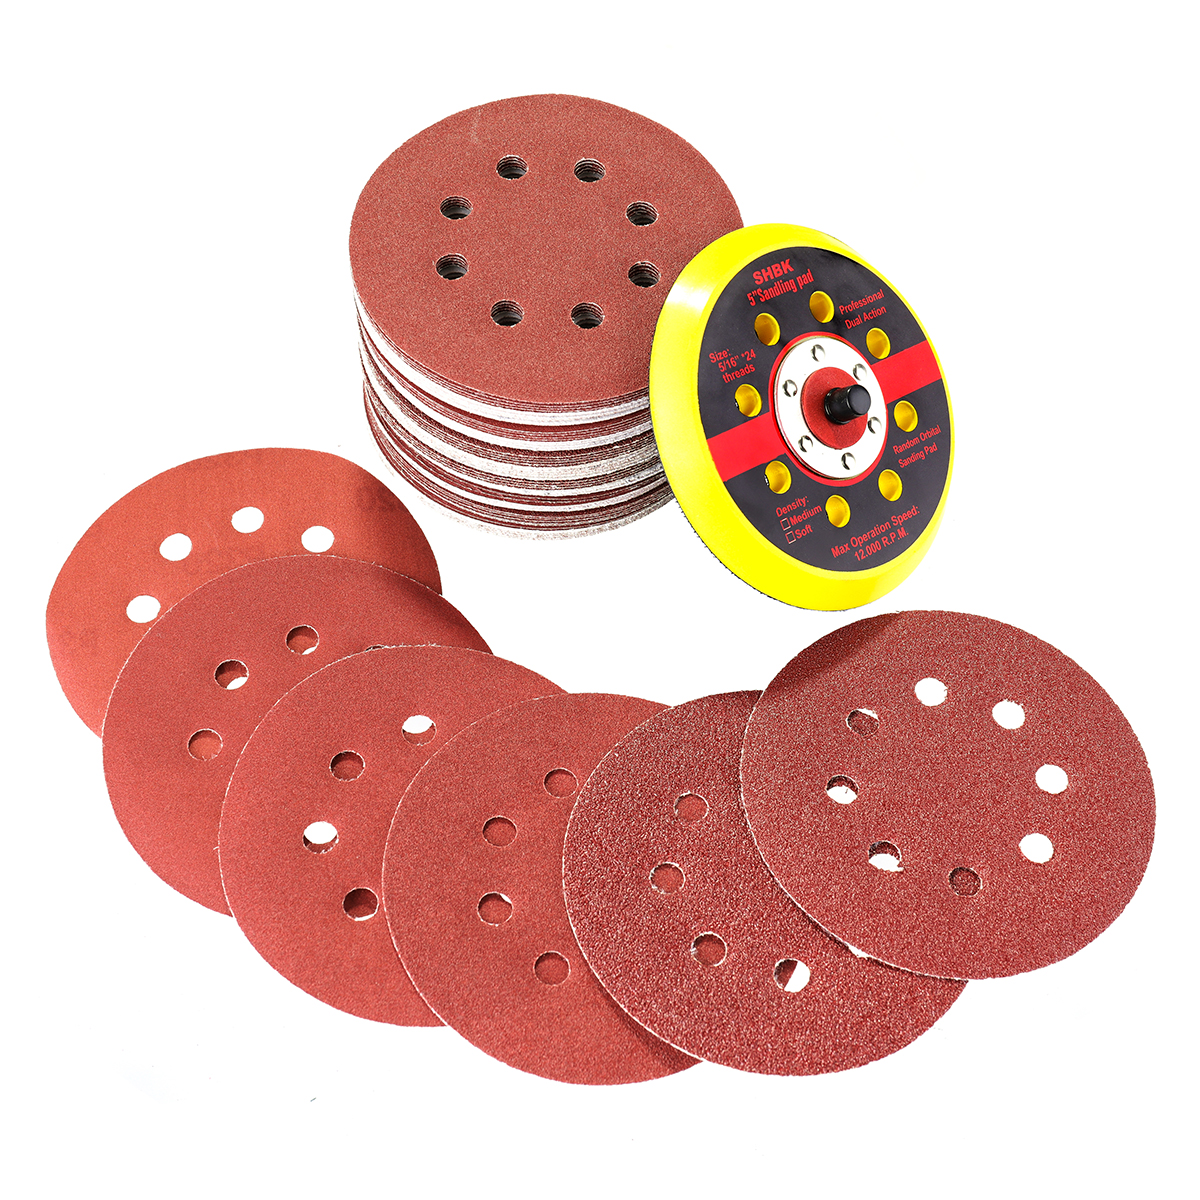 

60pcs 60-320 Grit Sanding Disc Sandpaper with Backing Pad for Rotary Tool